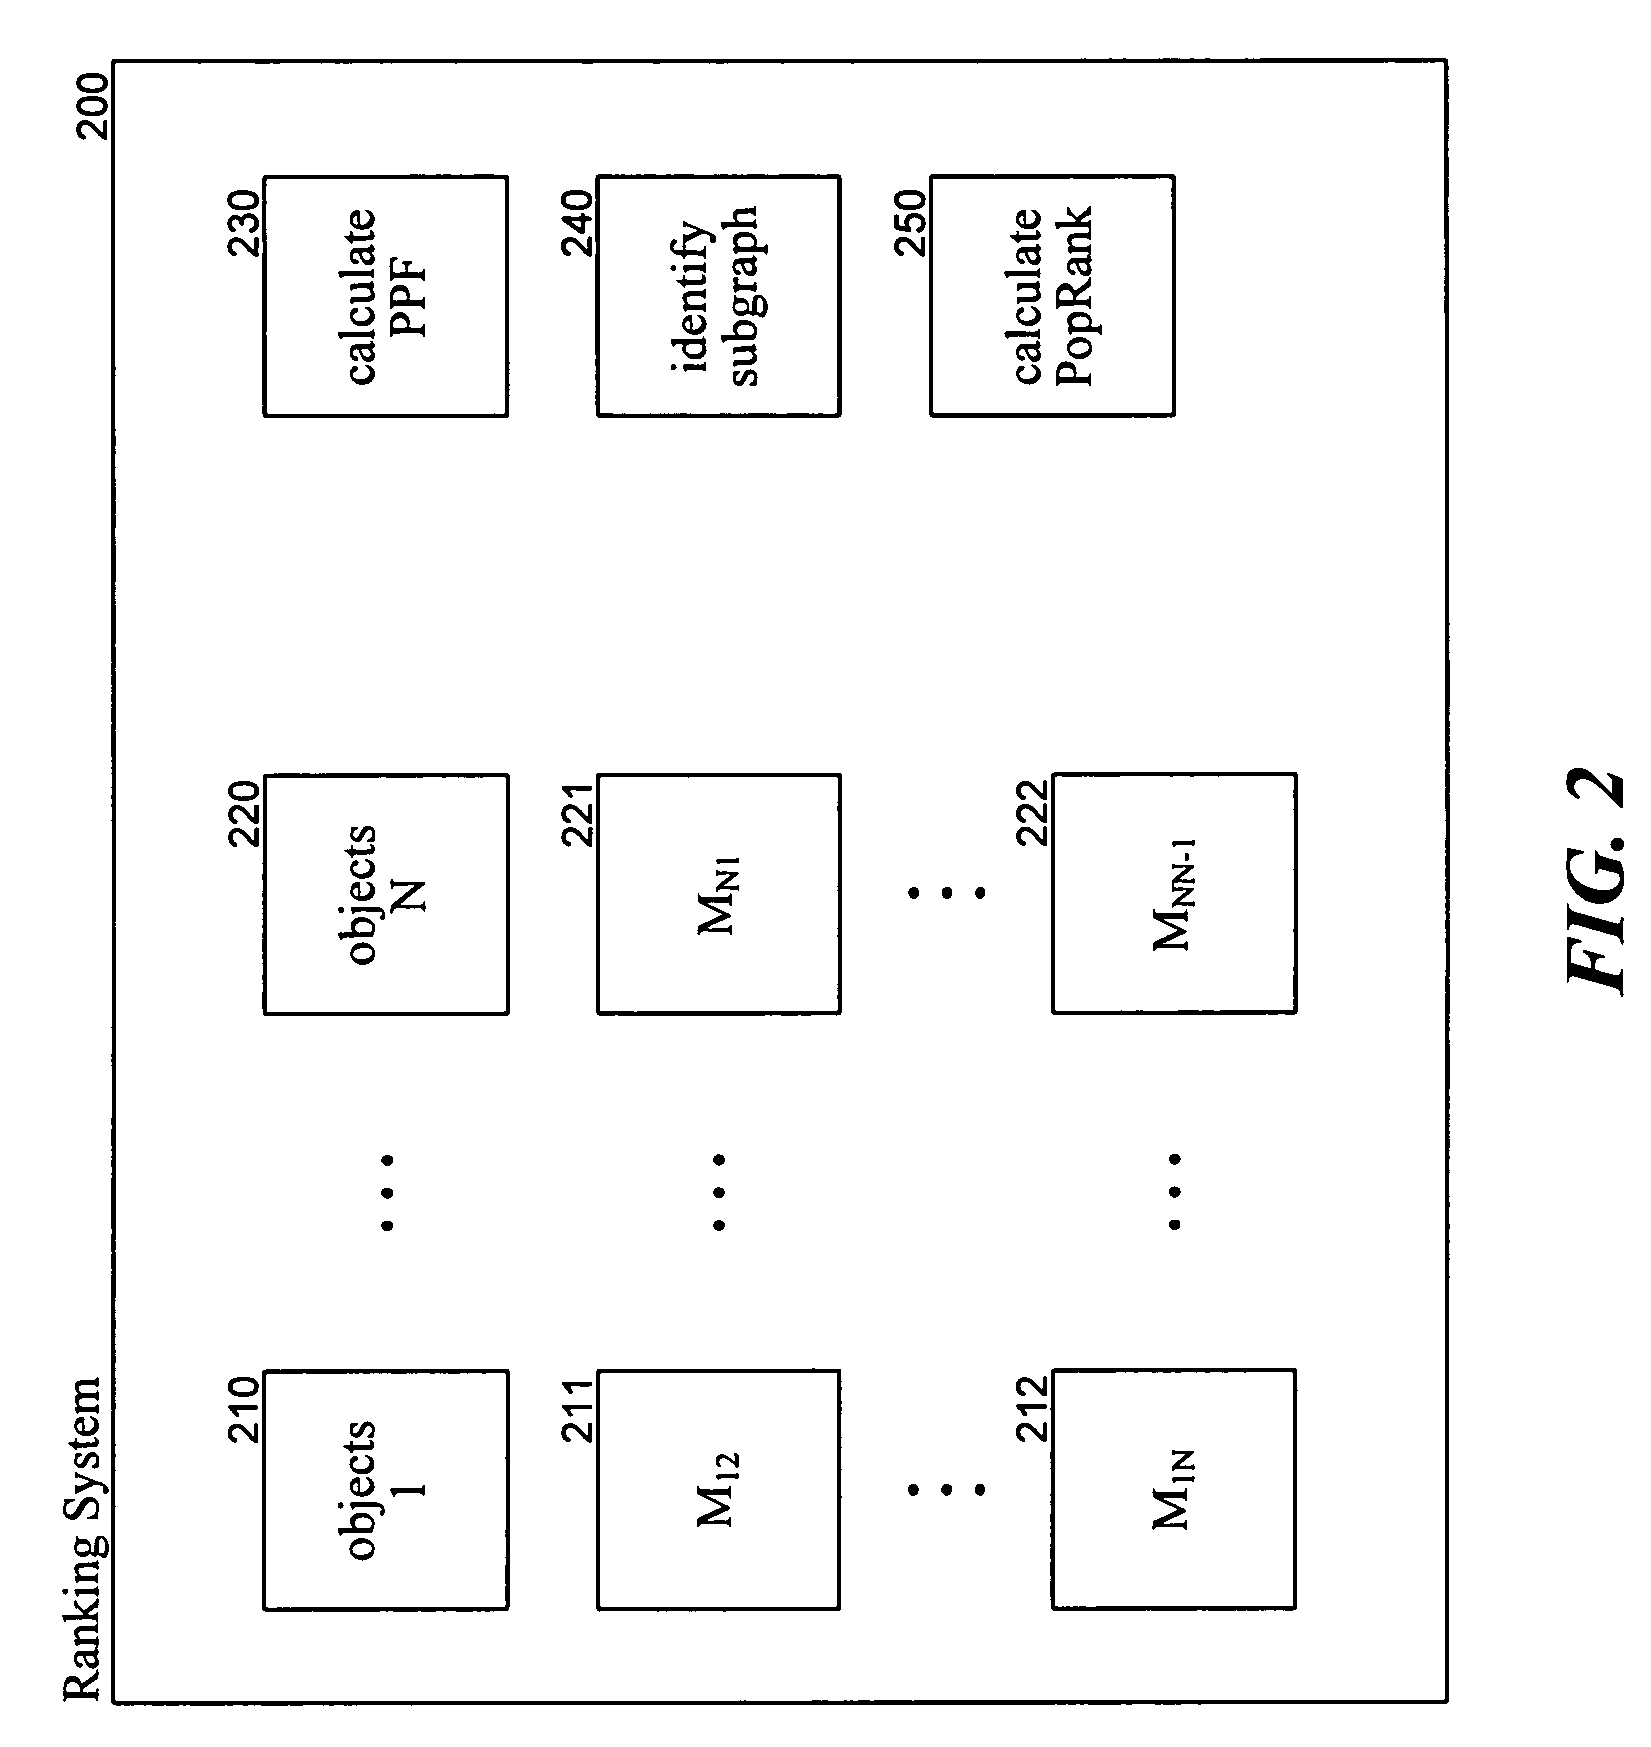 Method and system for ranking objects of different object types